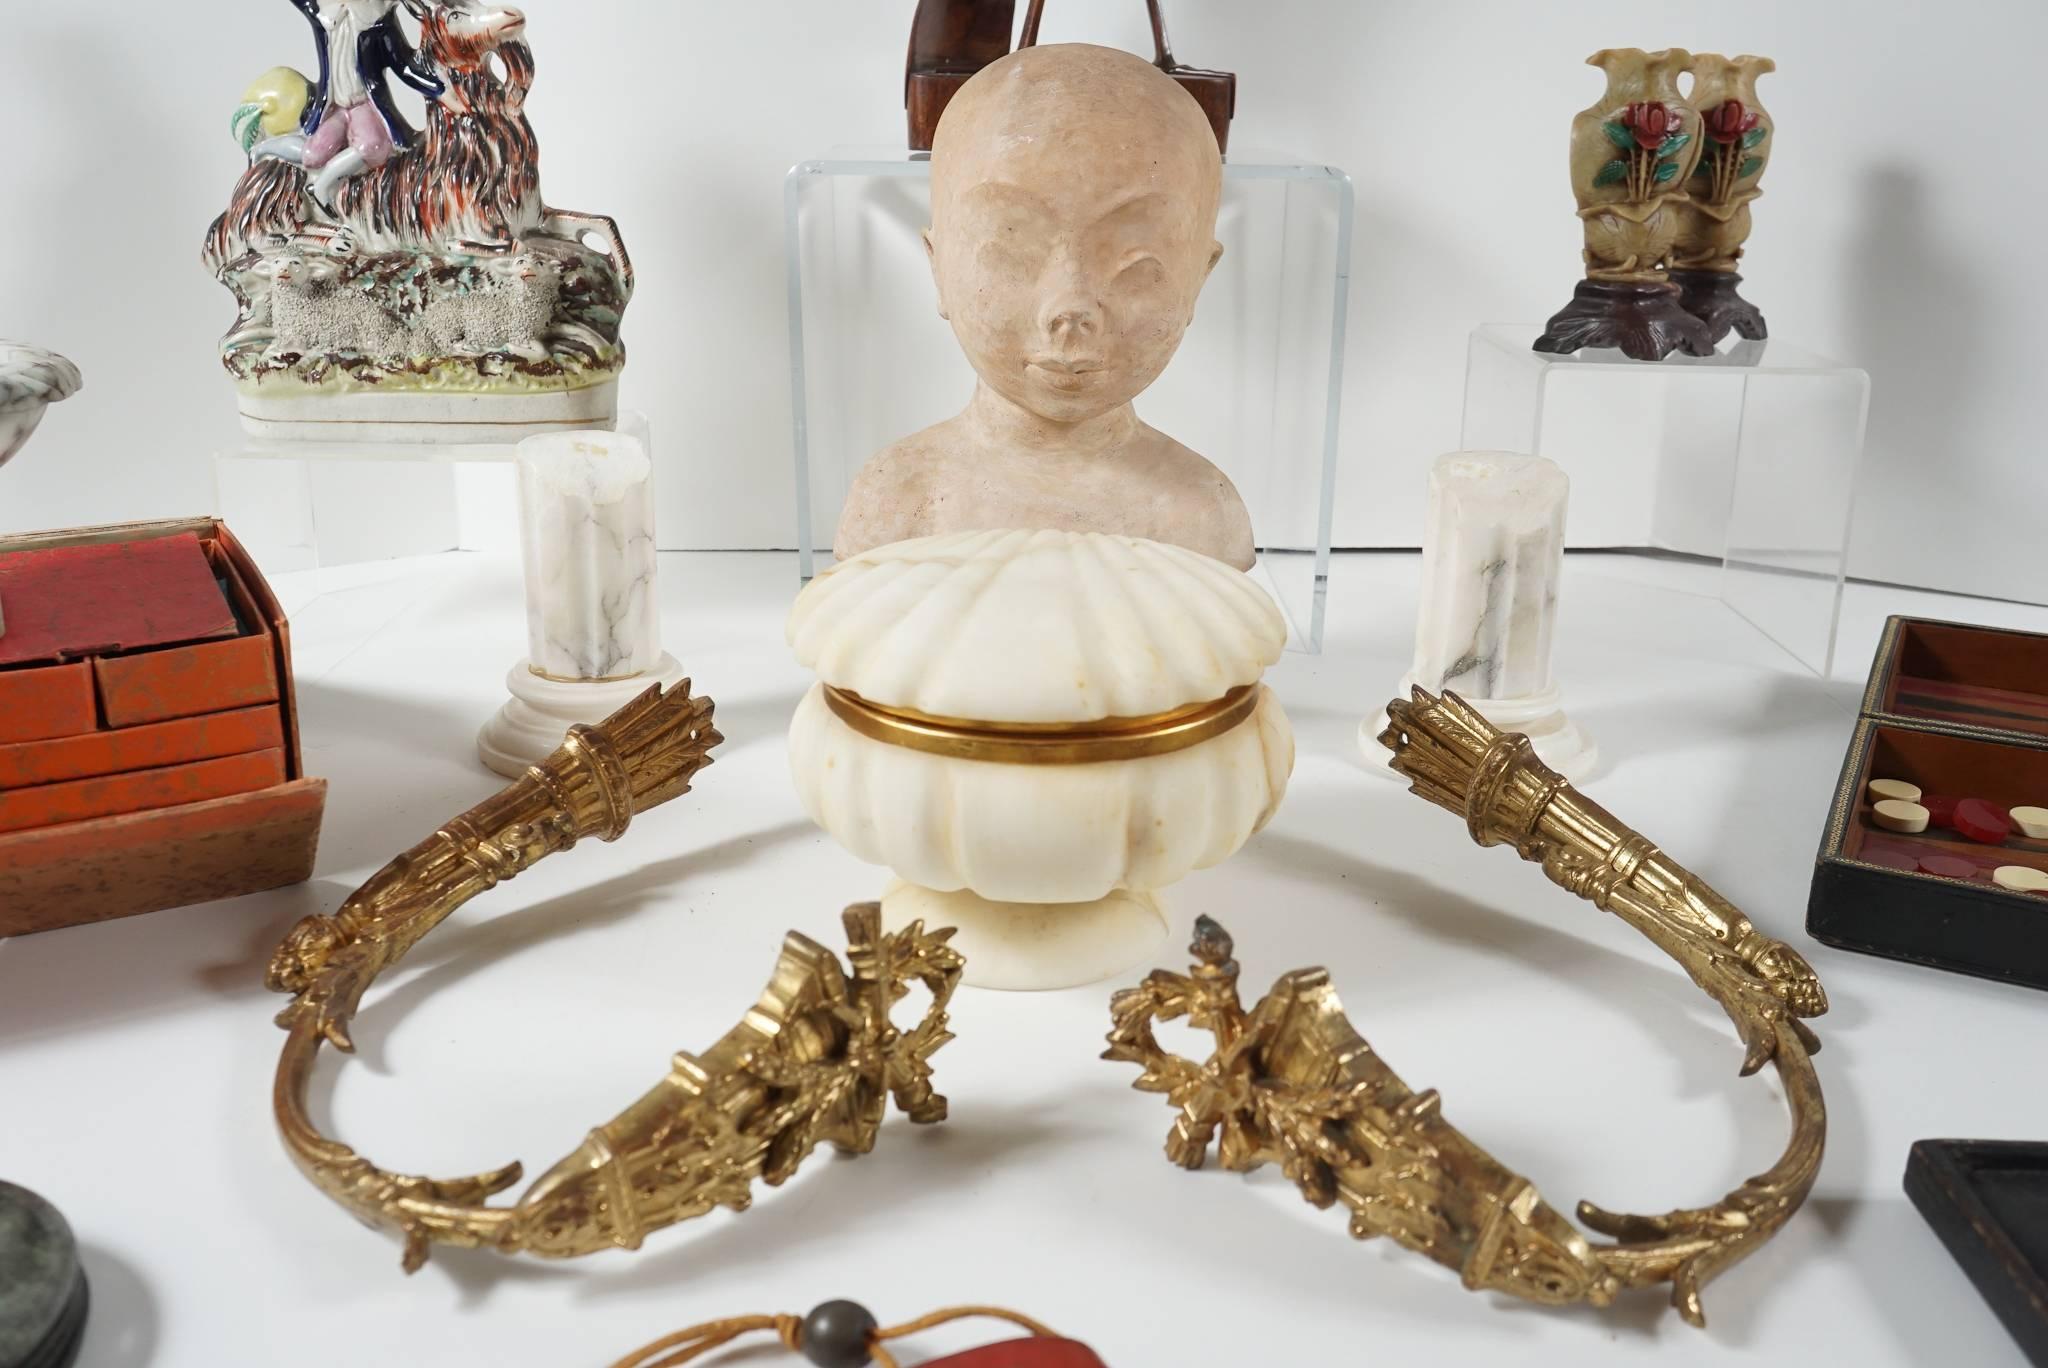 19th Century Life Style Collection of Objects from the Estate of Paul & Bunny Mellon